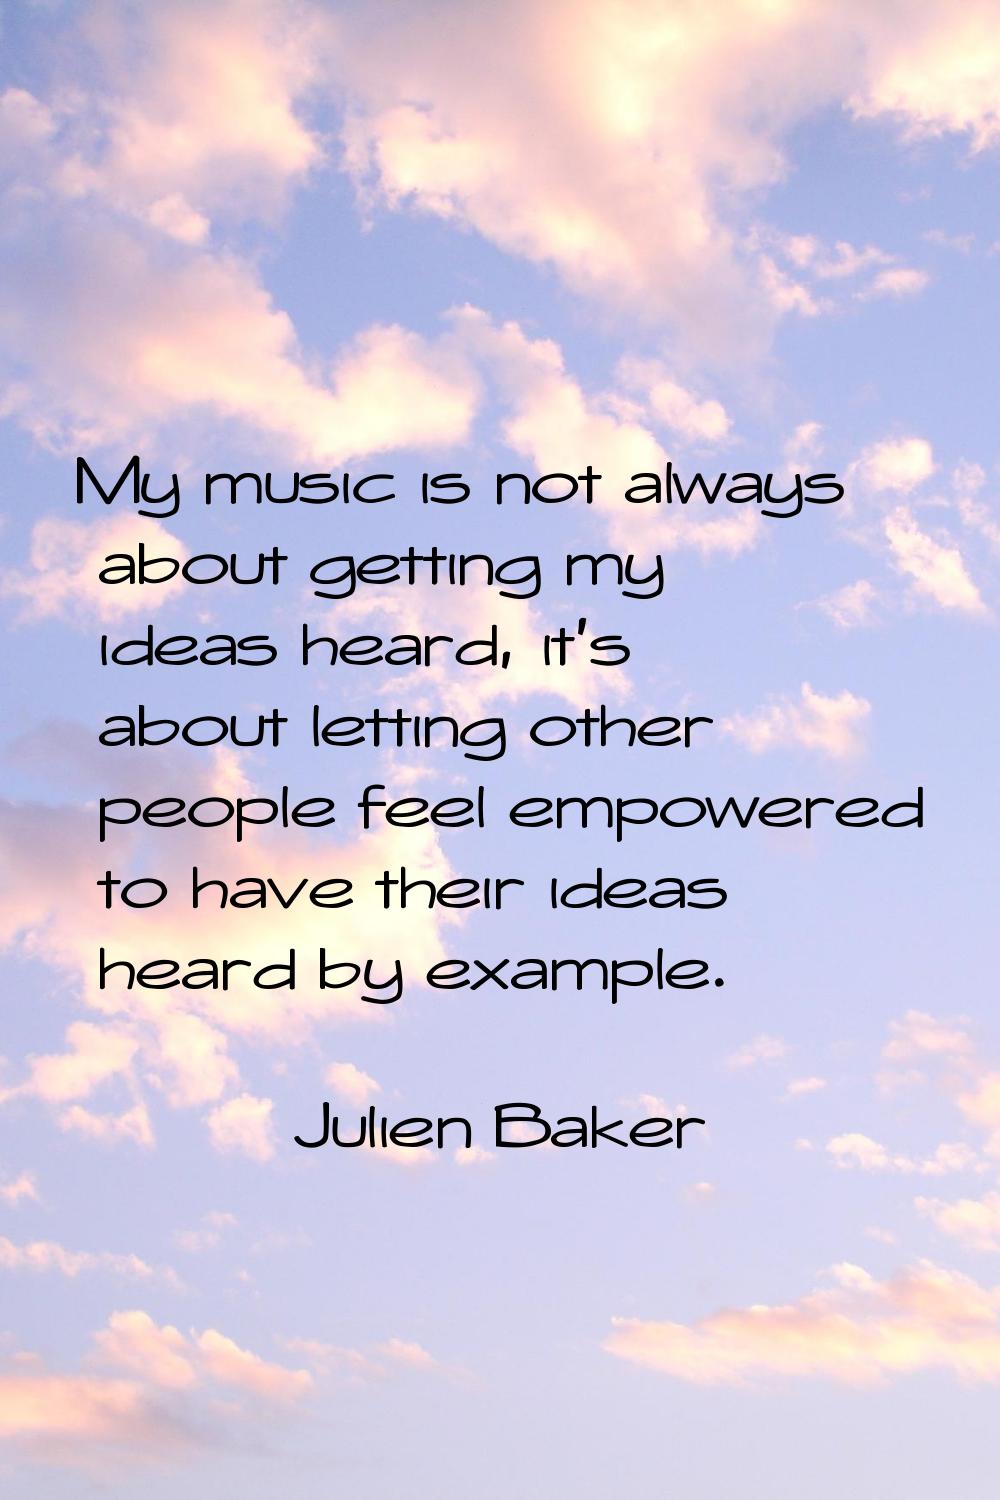 My music is not always about getting my ideas heard, it's about letting other people feel empowered